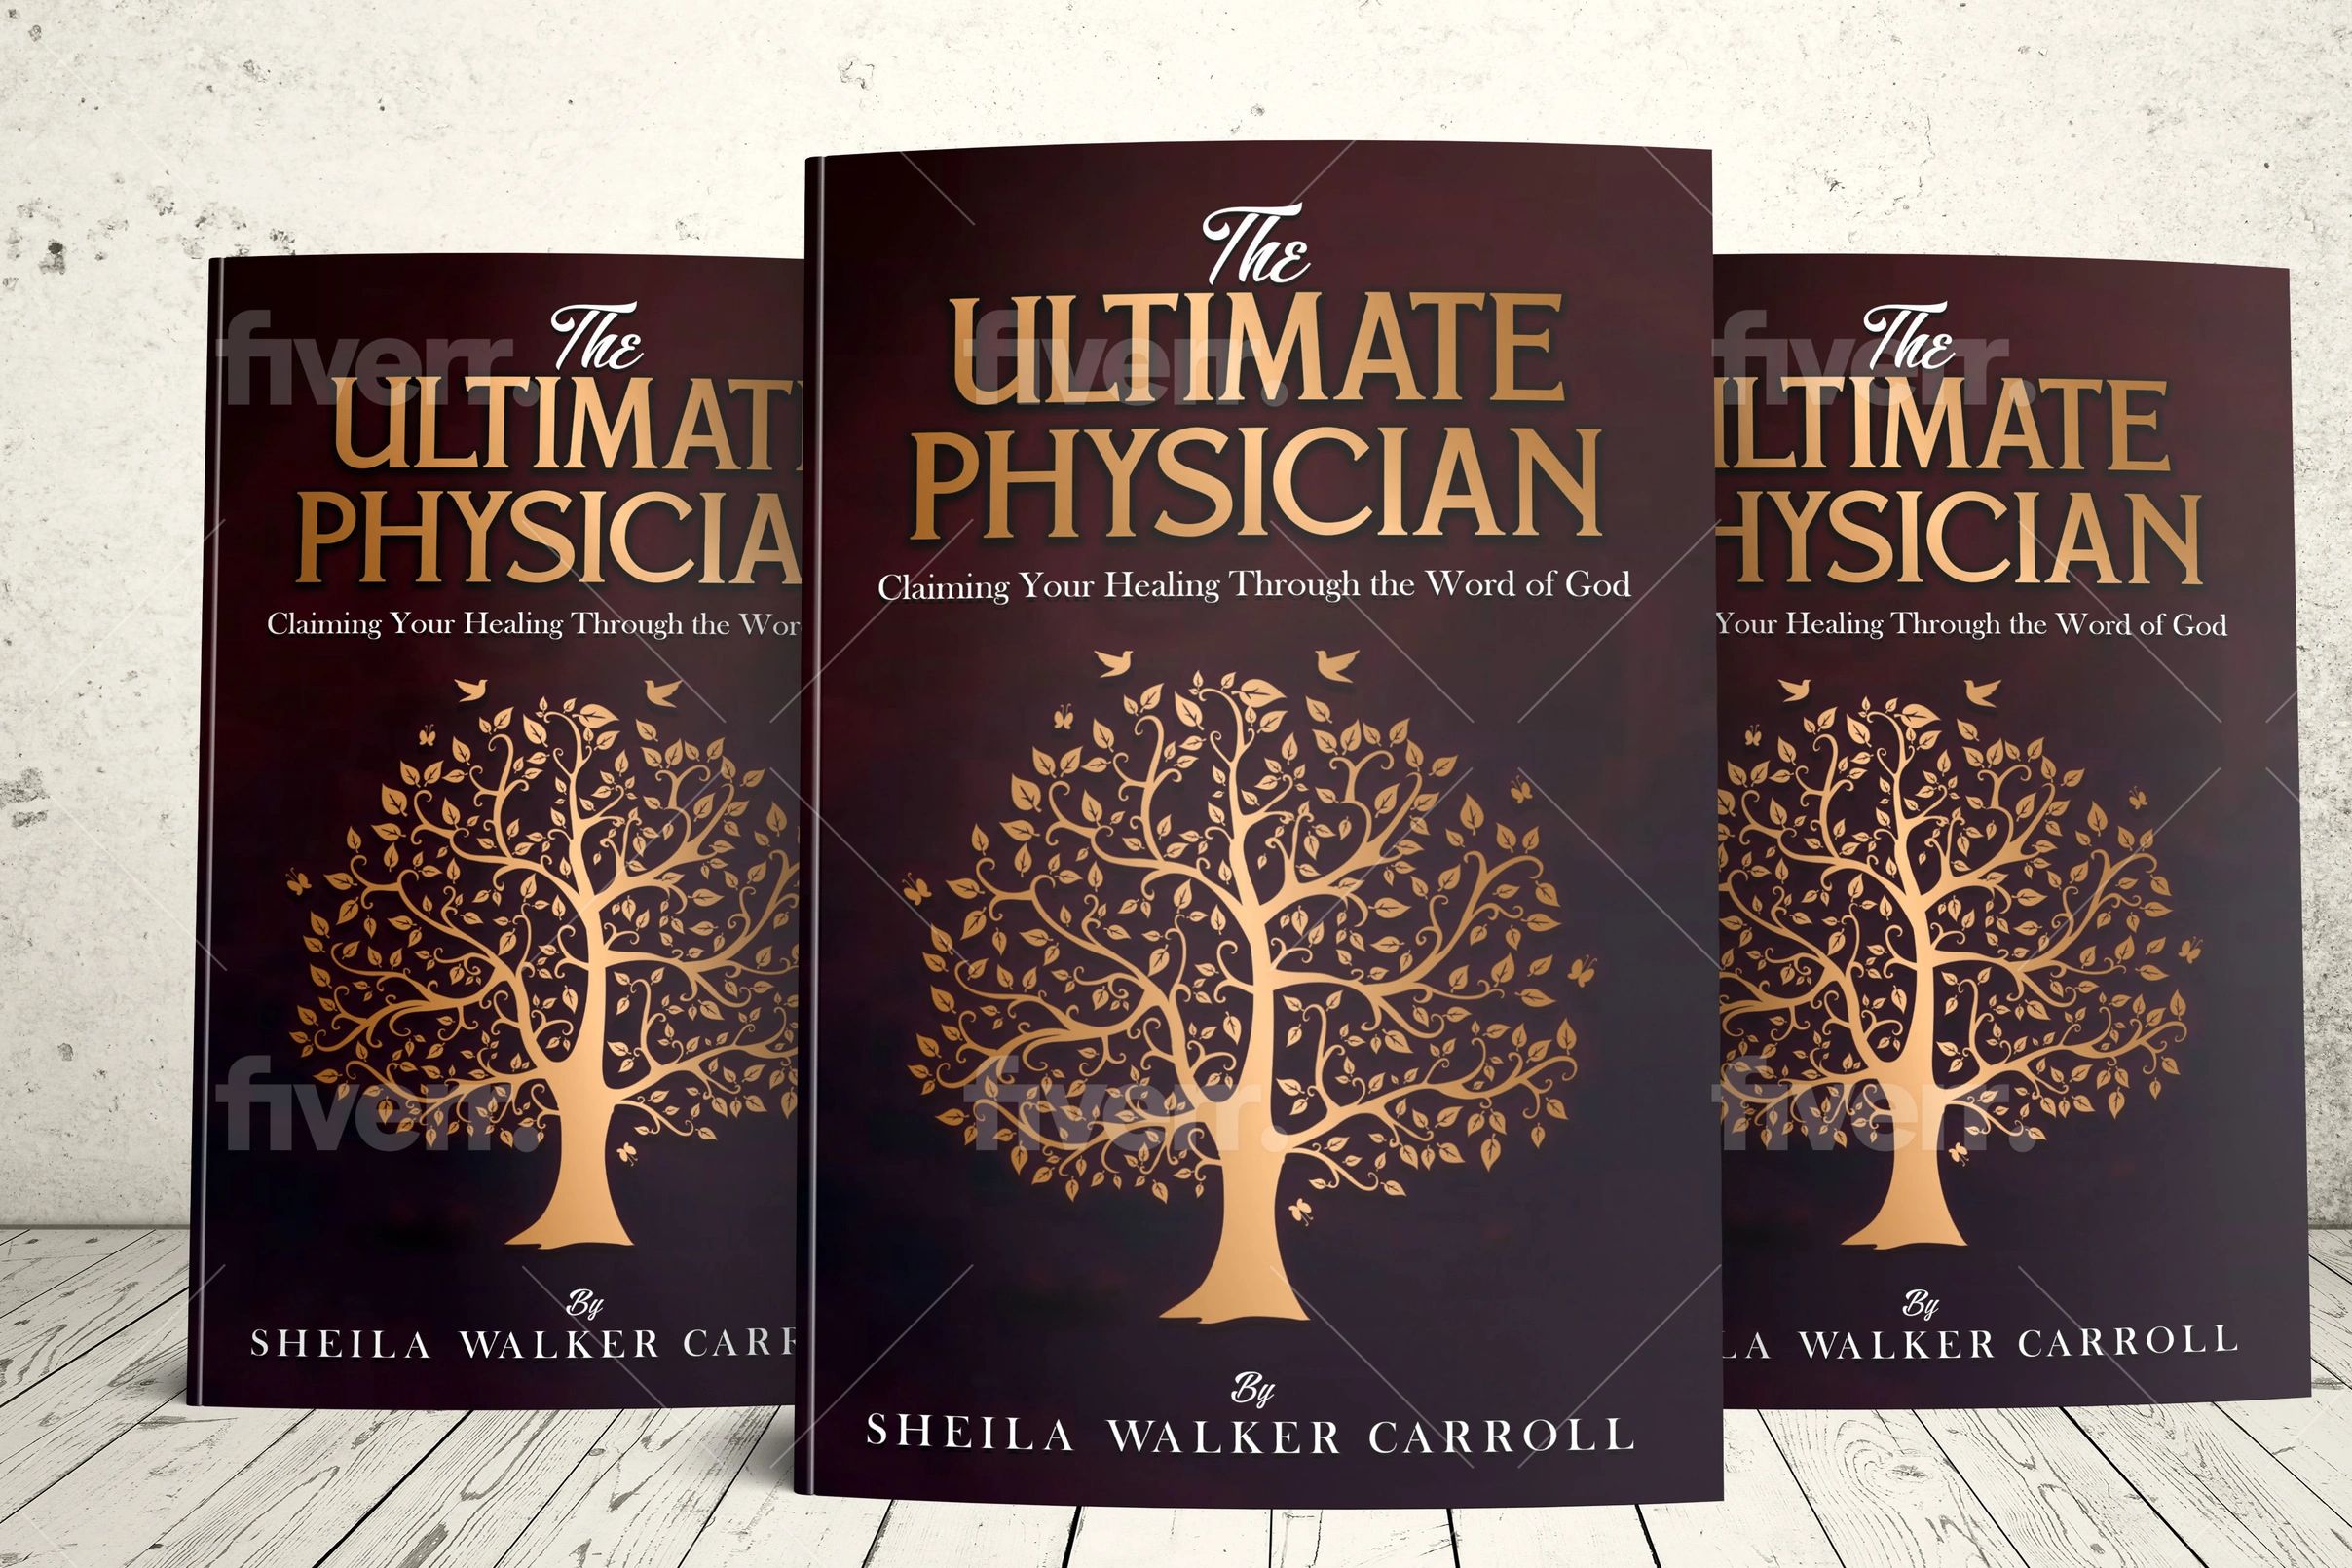 The Ultimate Physician: Claim Your Healing Through the Word of God
